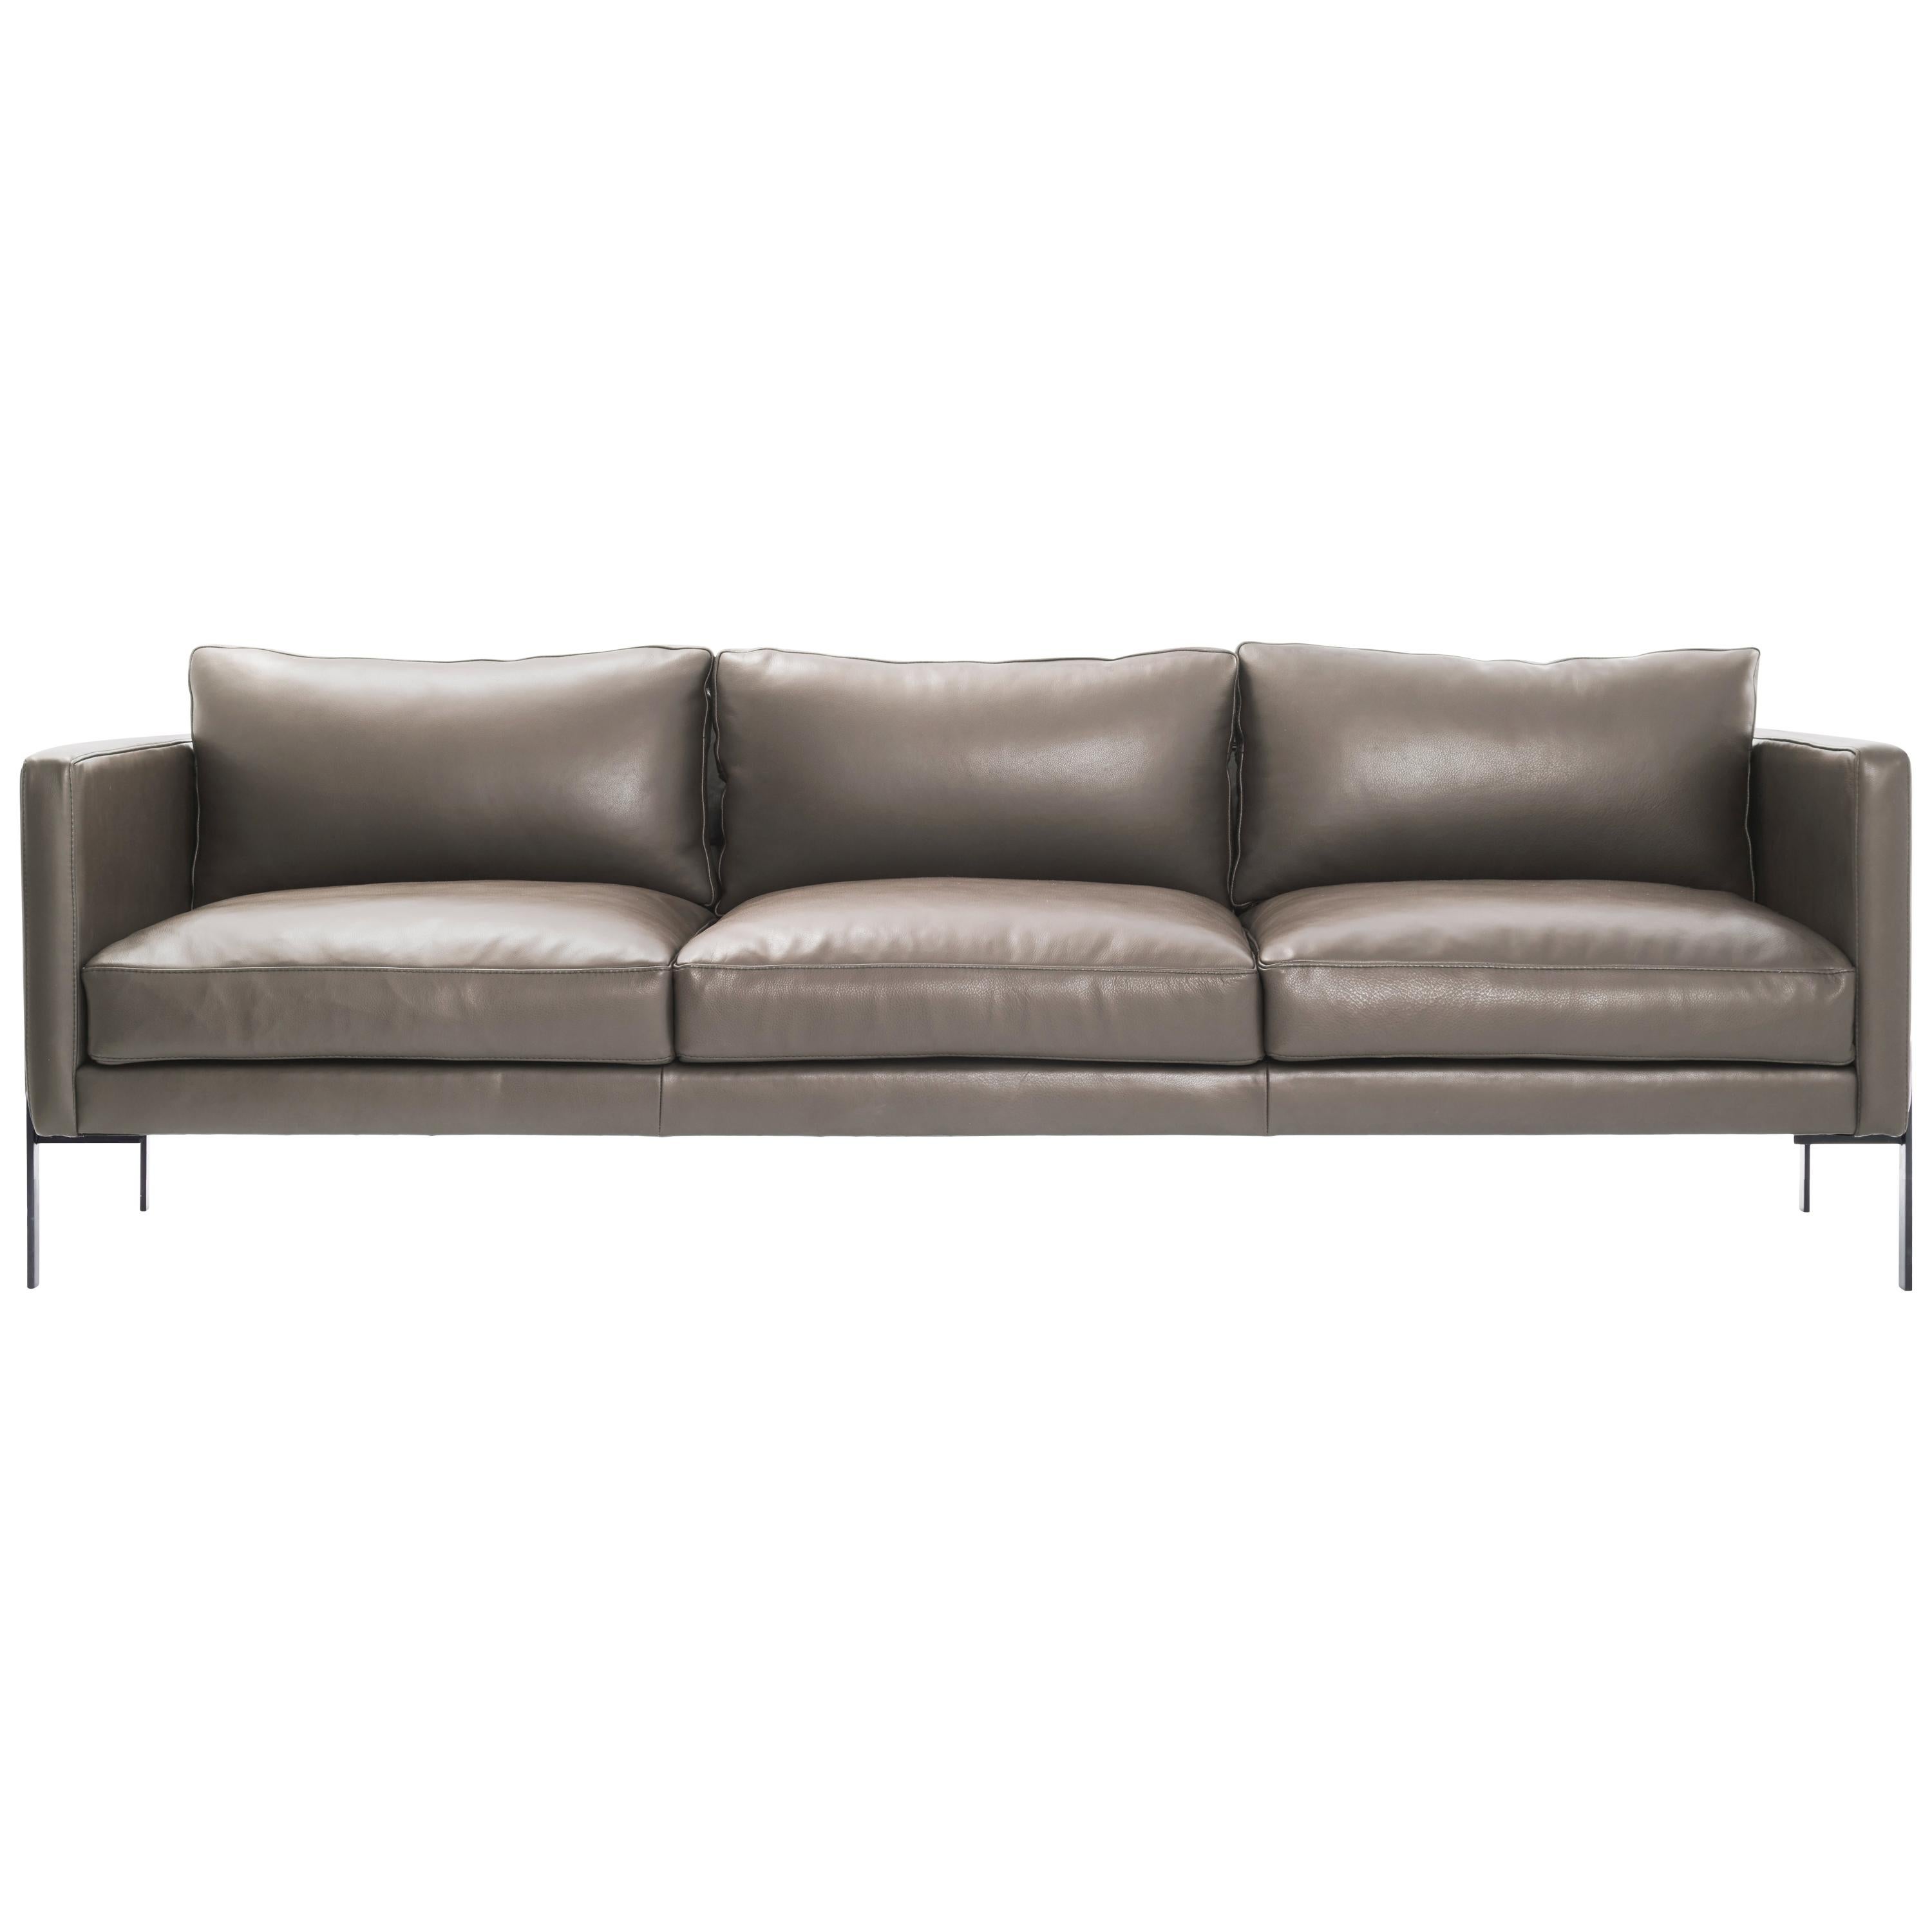 Truss Sofa in Greige Leather and Powder-Coated Steel by TRNK For Sale